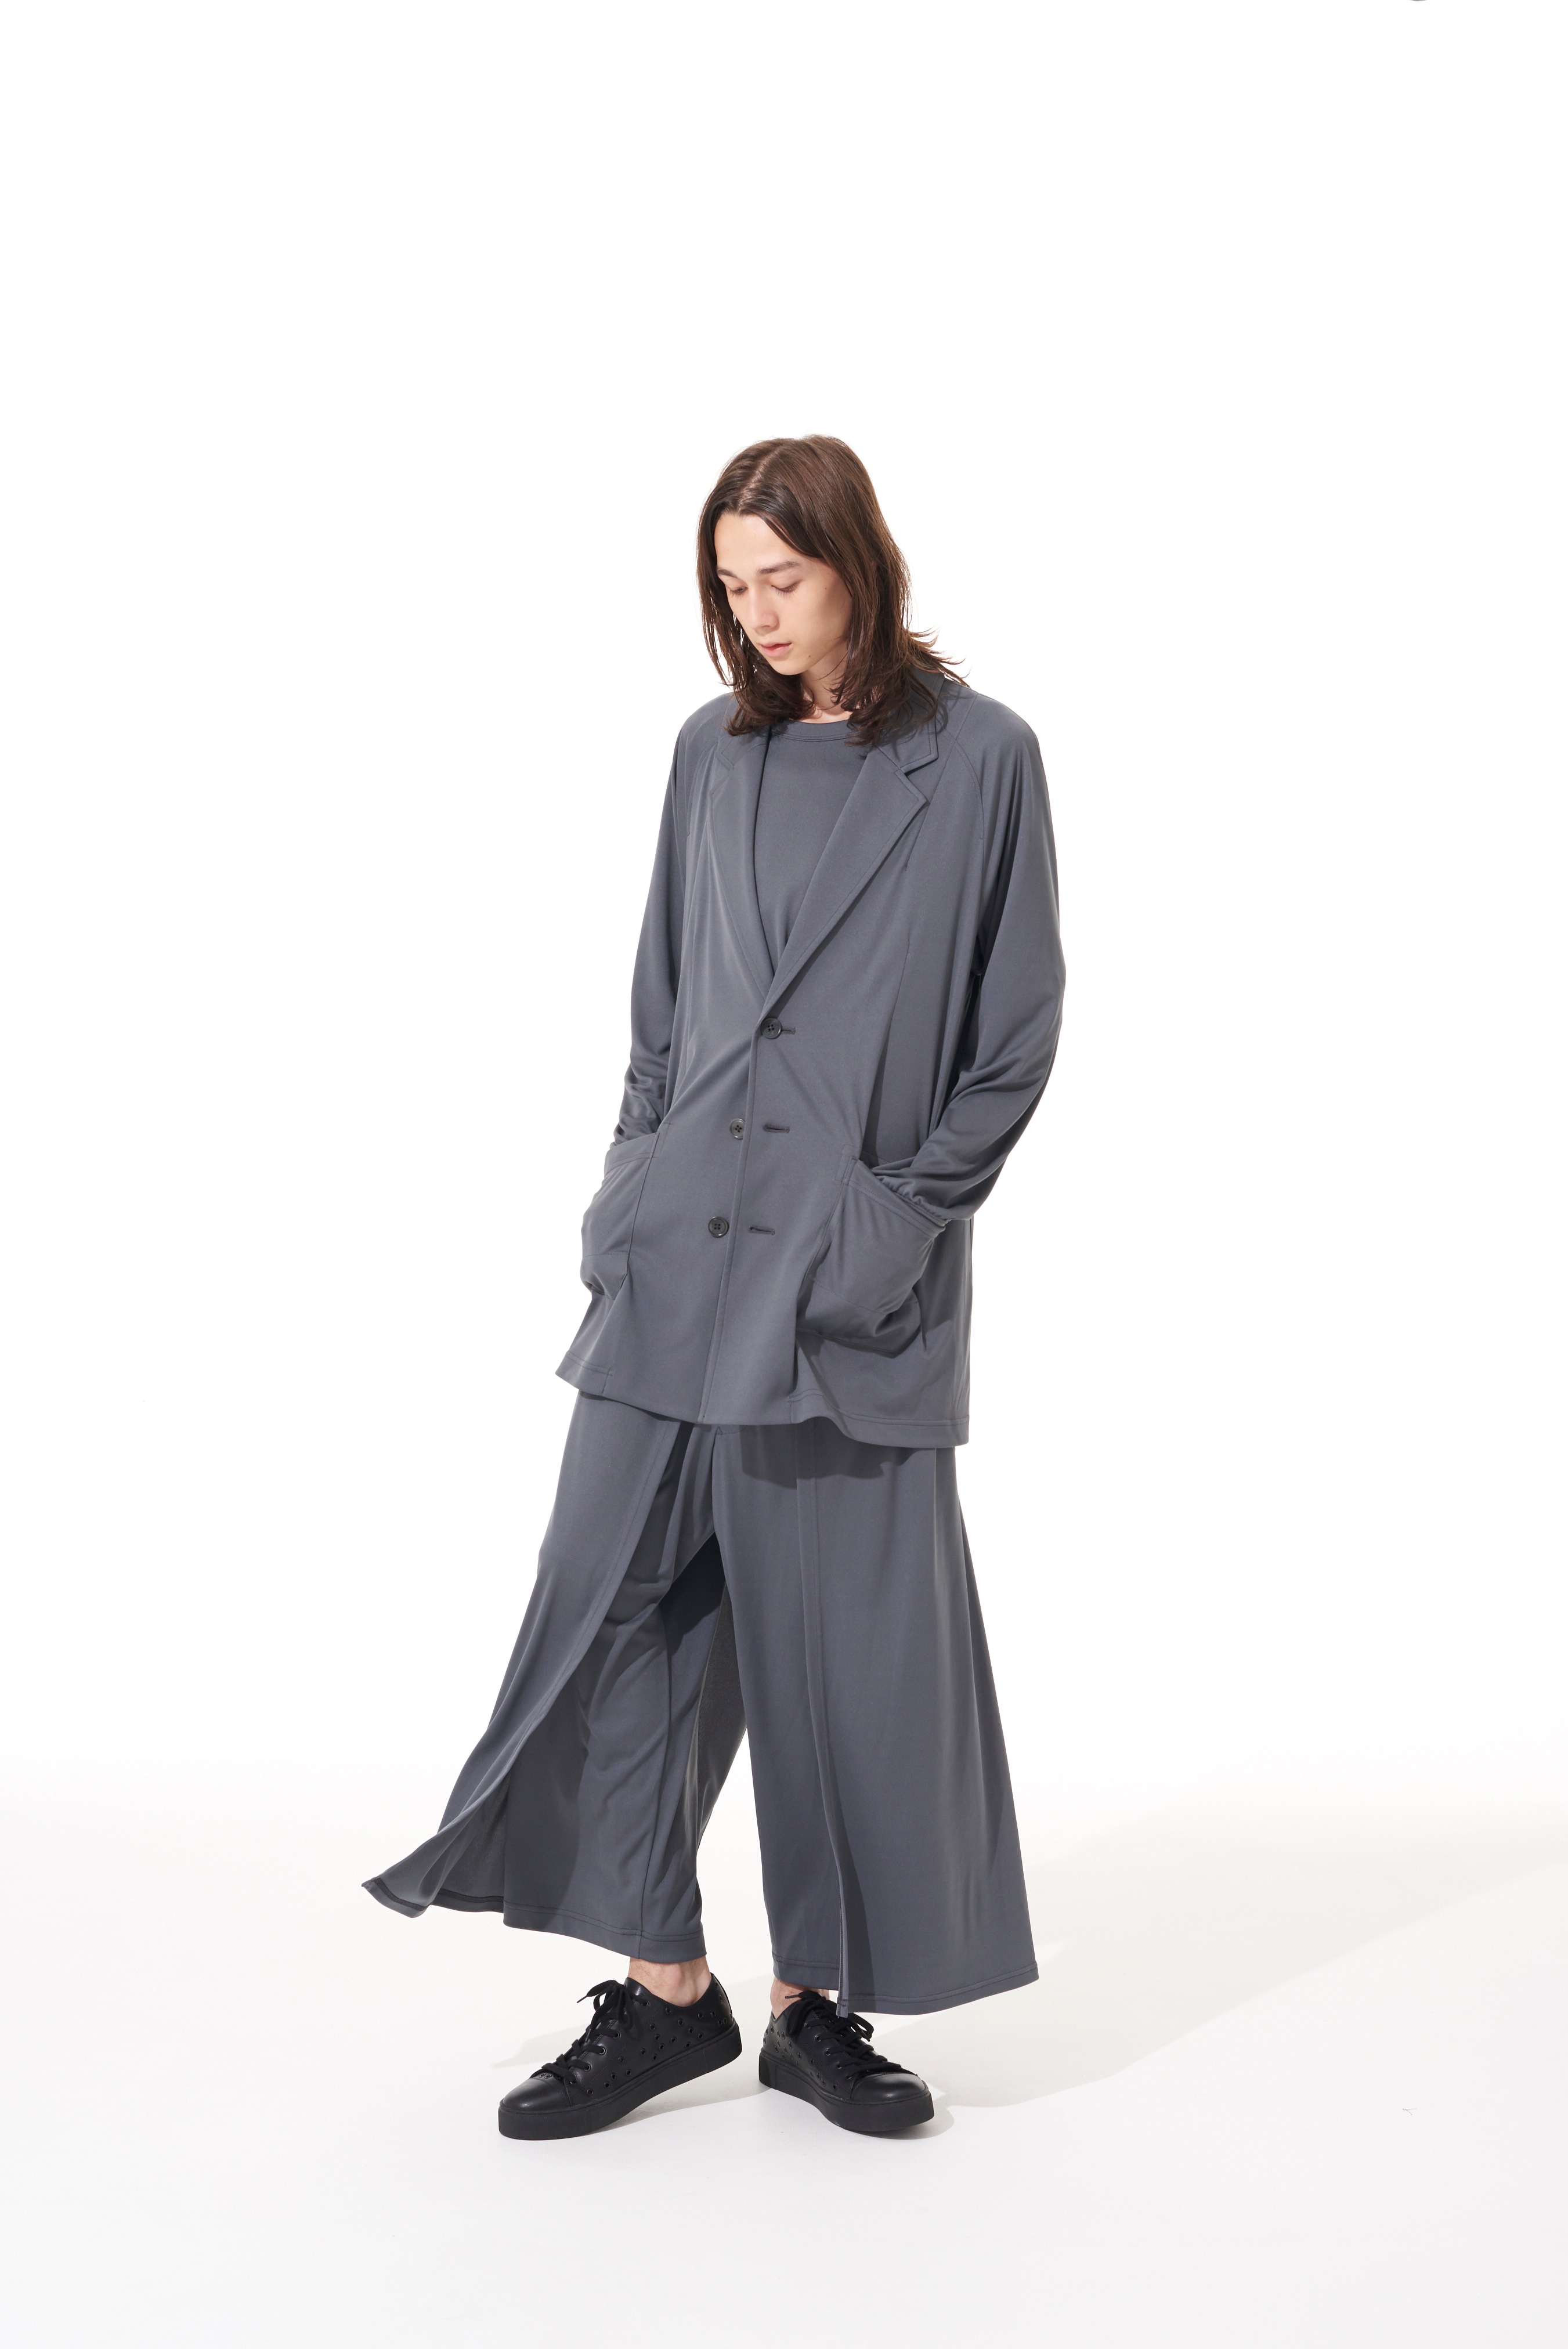 HIGH-GAUGE POLYESTER SMOOTH JERSEY  LAYERED PANTS